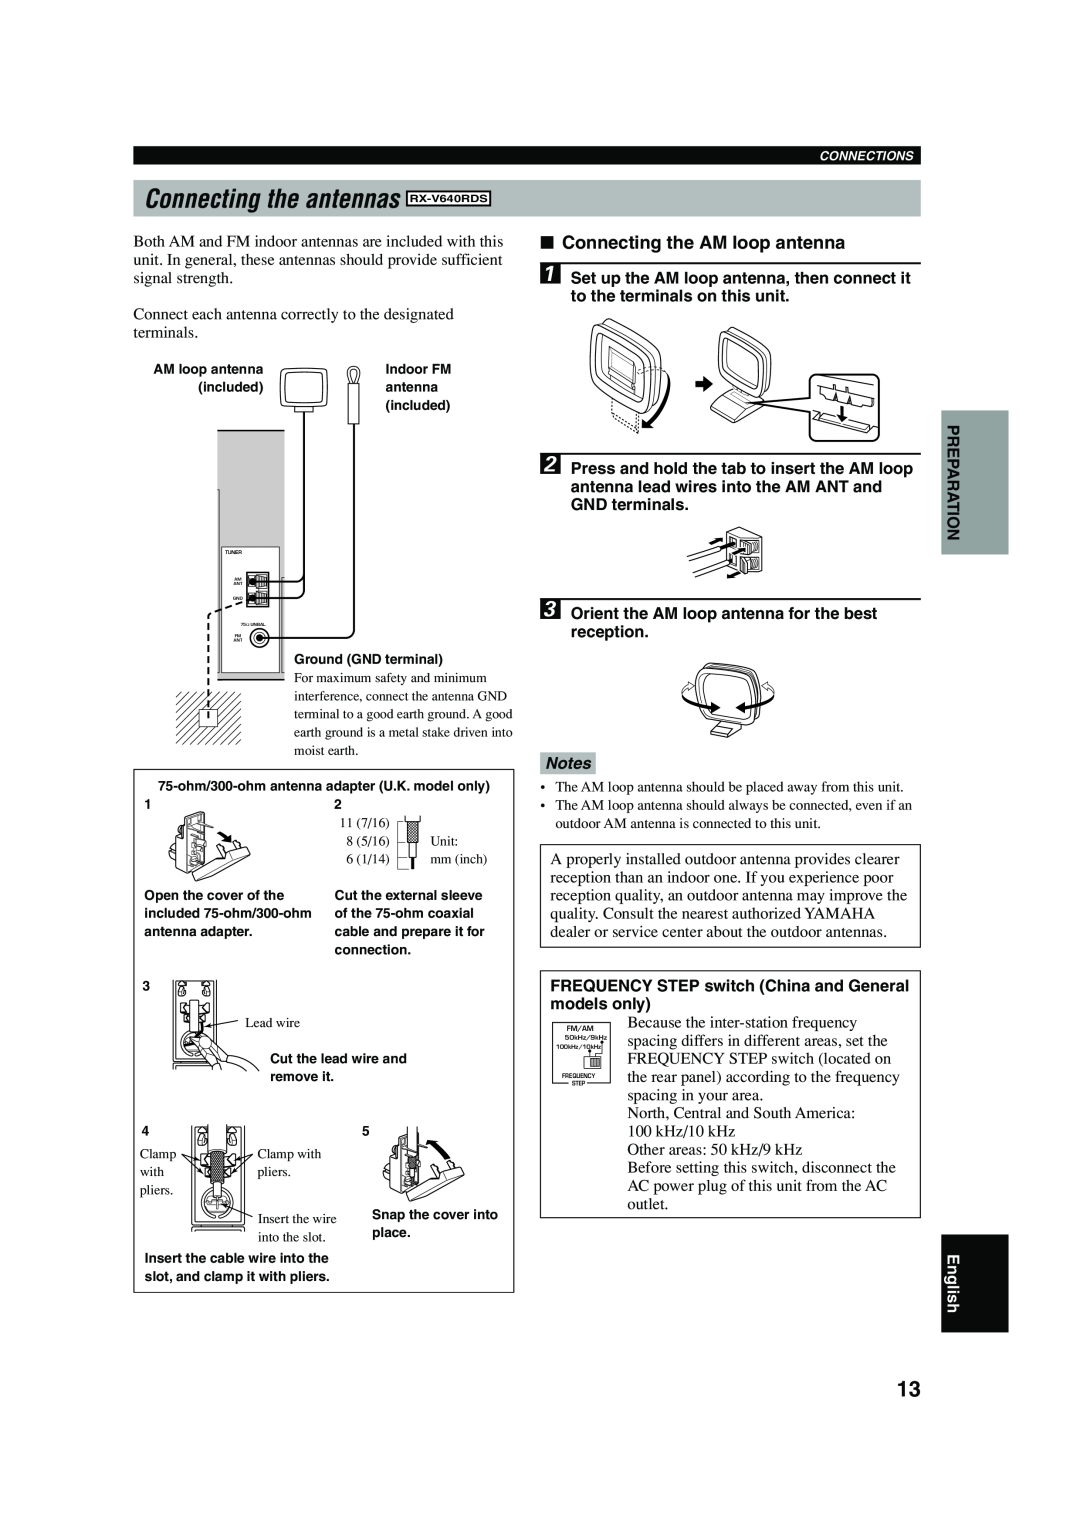 Yamaha owner manual Connecting the antennas RX-V640RDS, Connecting the AM loop antenna, Notes, English 